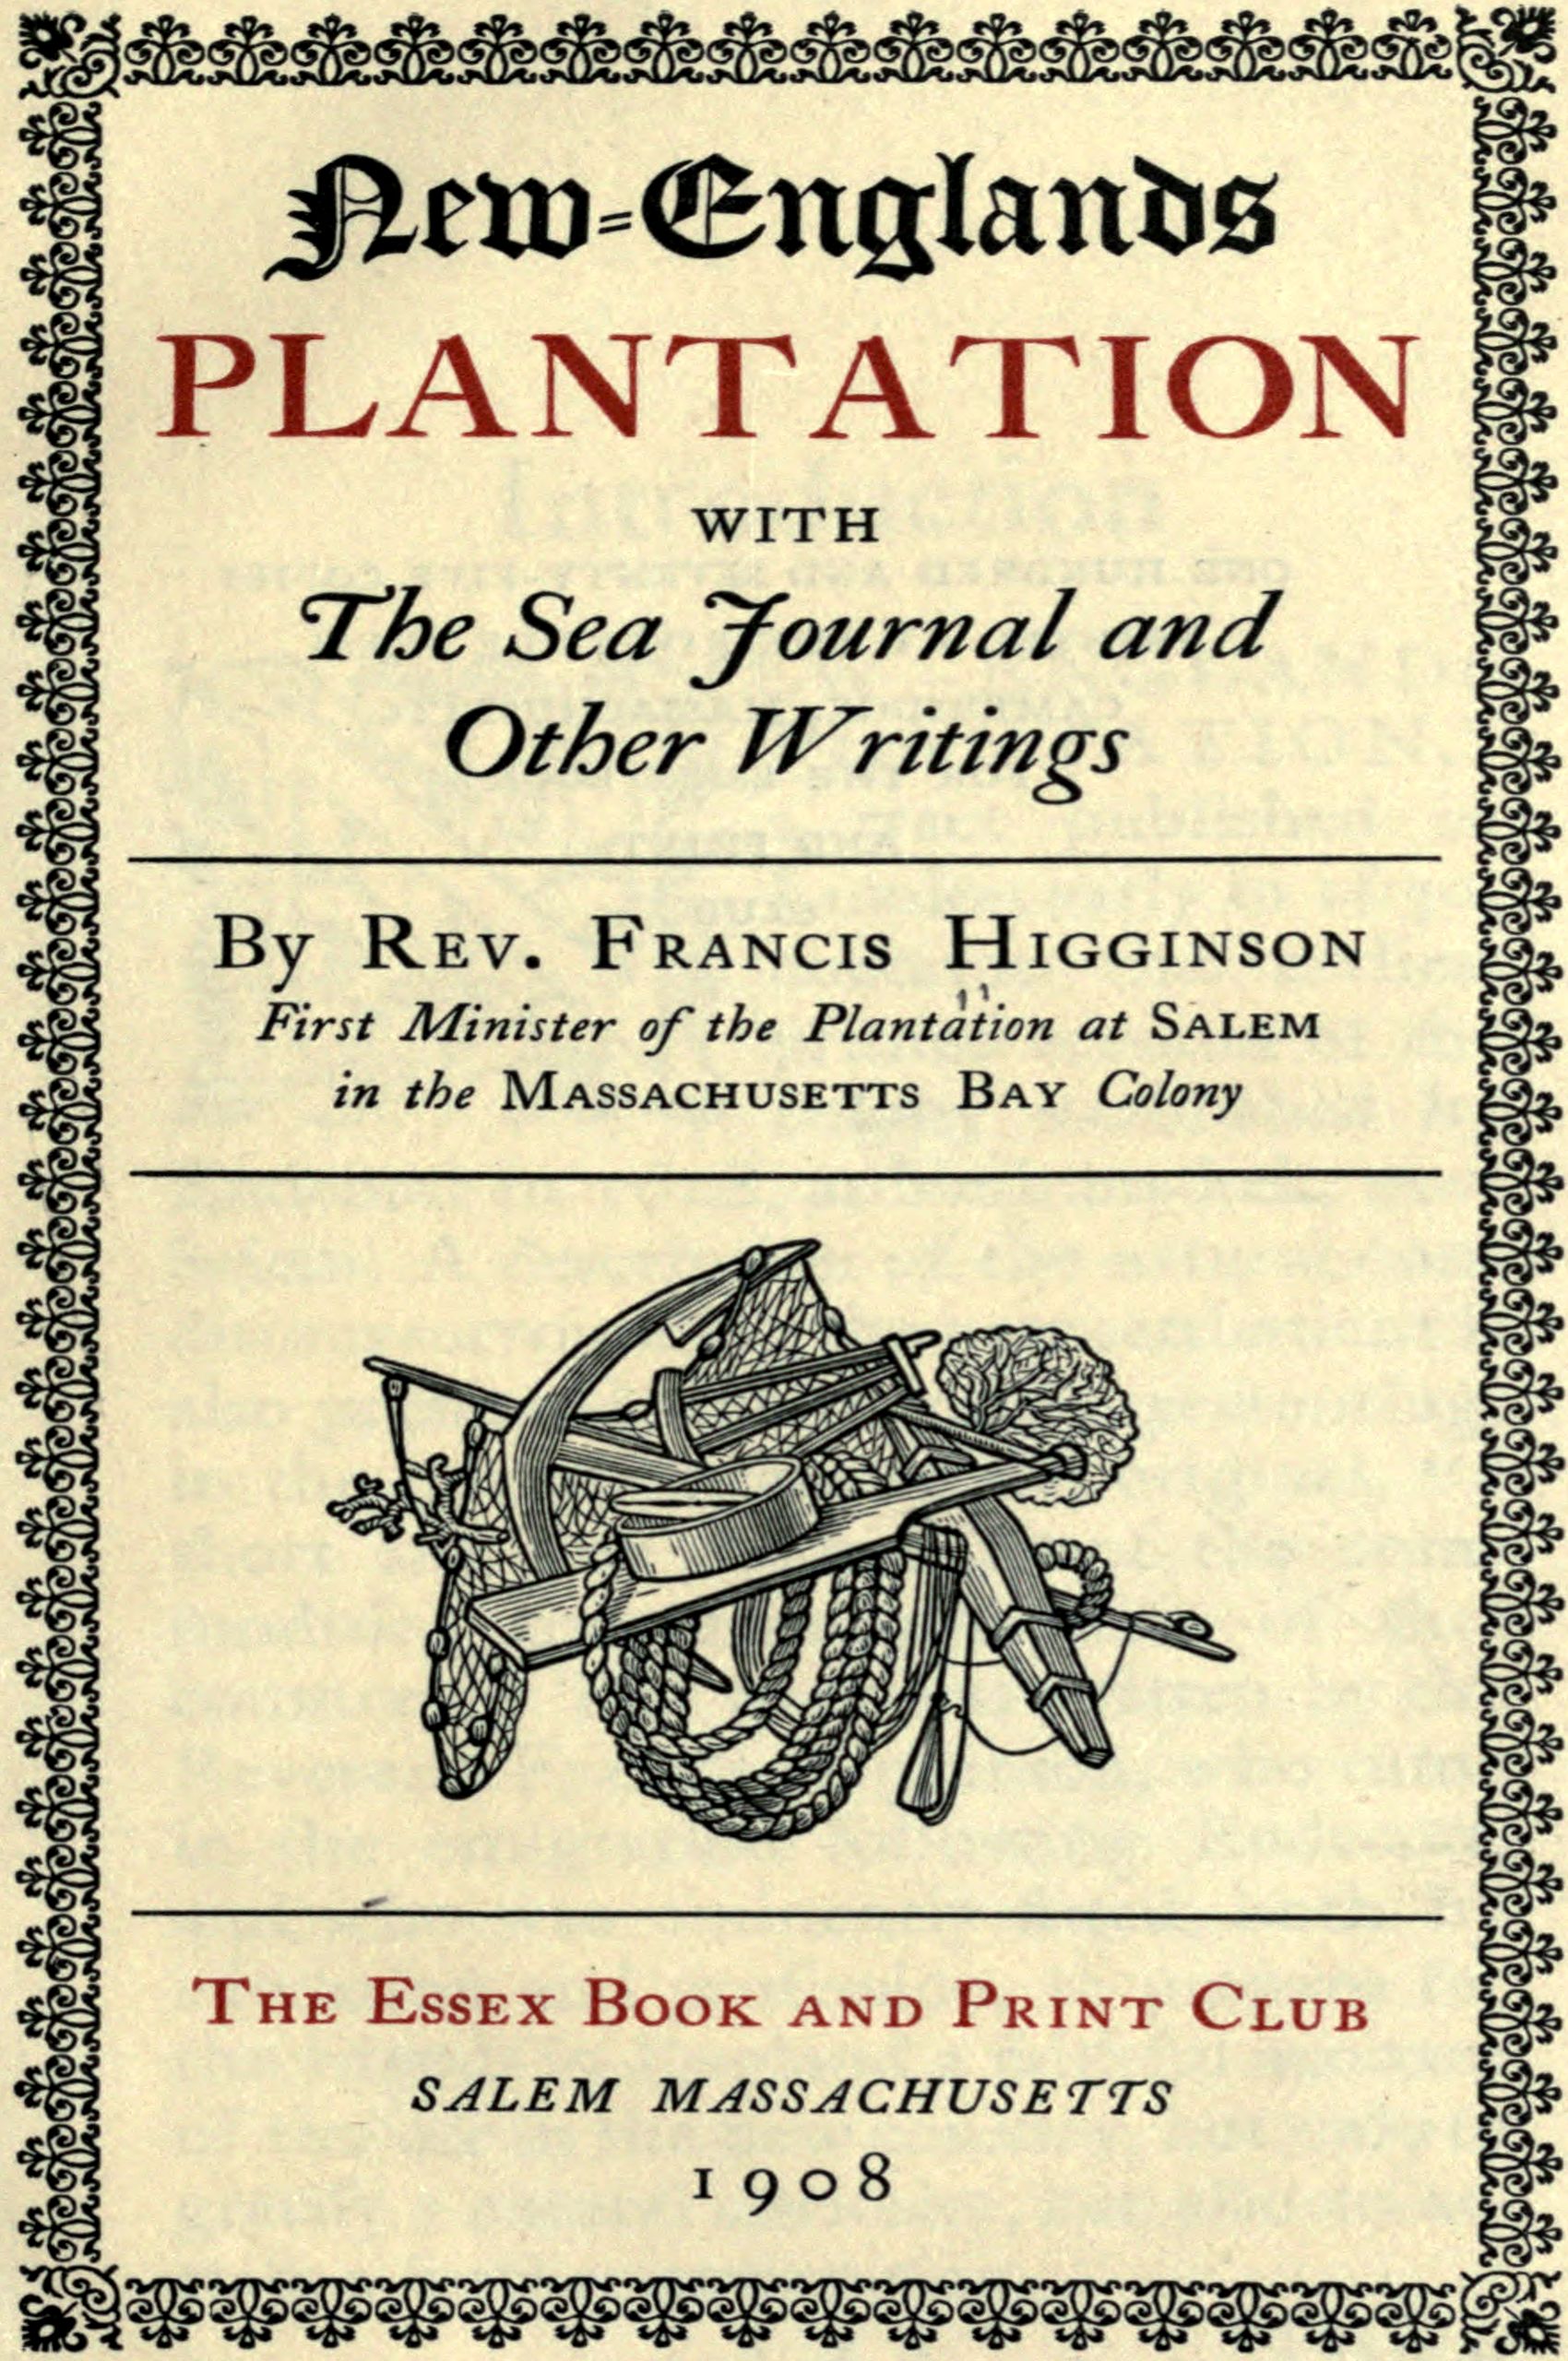 Cover of this 1908 reprint